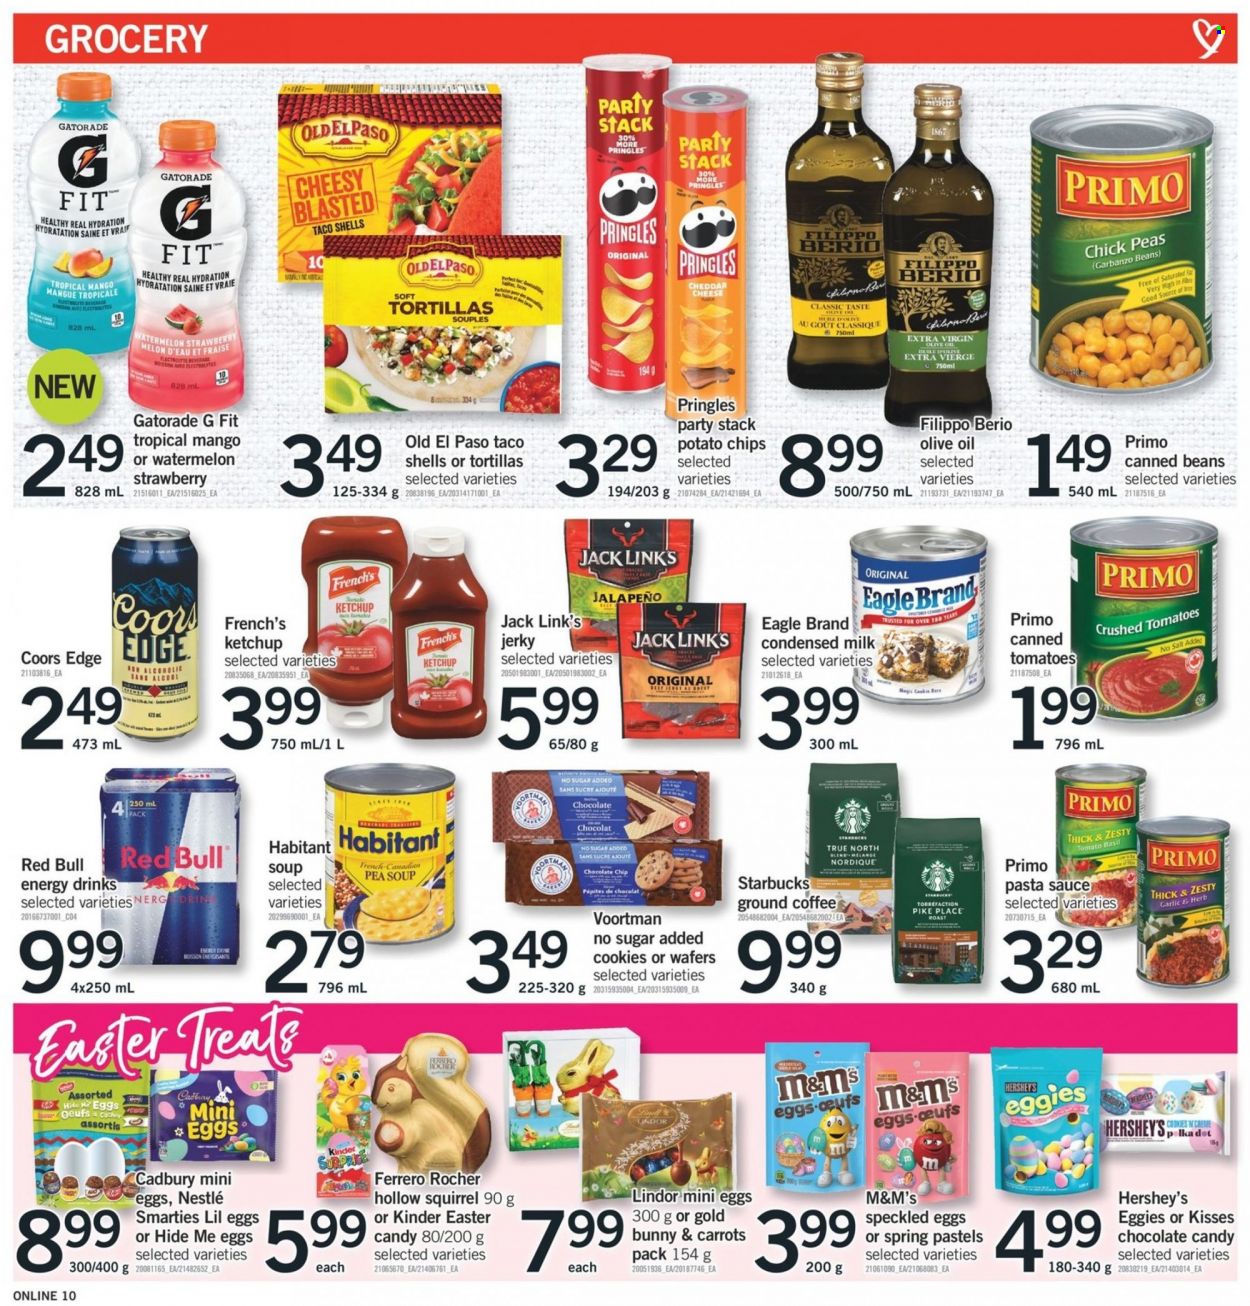 thumbnail - Fortinos Flyer - March 23, 2023 - March 29, 2023 - Sales products - tortillas, Old El Paso, carrots, peas, jalapeño, mango, watermelon, melons, pasta sauce, soup, sauce, roast, beef jerky, jerky, cheese, condensed milk, Hershey's, cookies, wafers, chocolate chips, Kinder Surprise, Cadbury, chocolate egg, chocolate candies, easter candy, potato chips, Pringles, chips, Jack Link's, crushed tomatoes, extra virgin olive oil, olive oil, oil, energy drink, Red Bull, Gatorade, coffee, ground coffee, Starbucks, beer, Nestlé, ketchup, Lindor, Ferrero Rocher, Smarties, M&M's, Coors. Page 10.